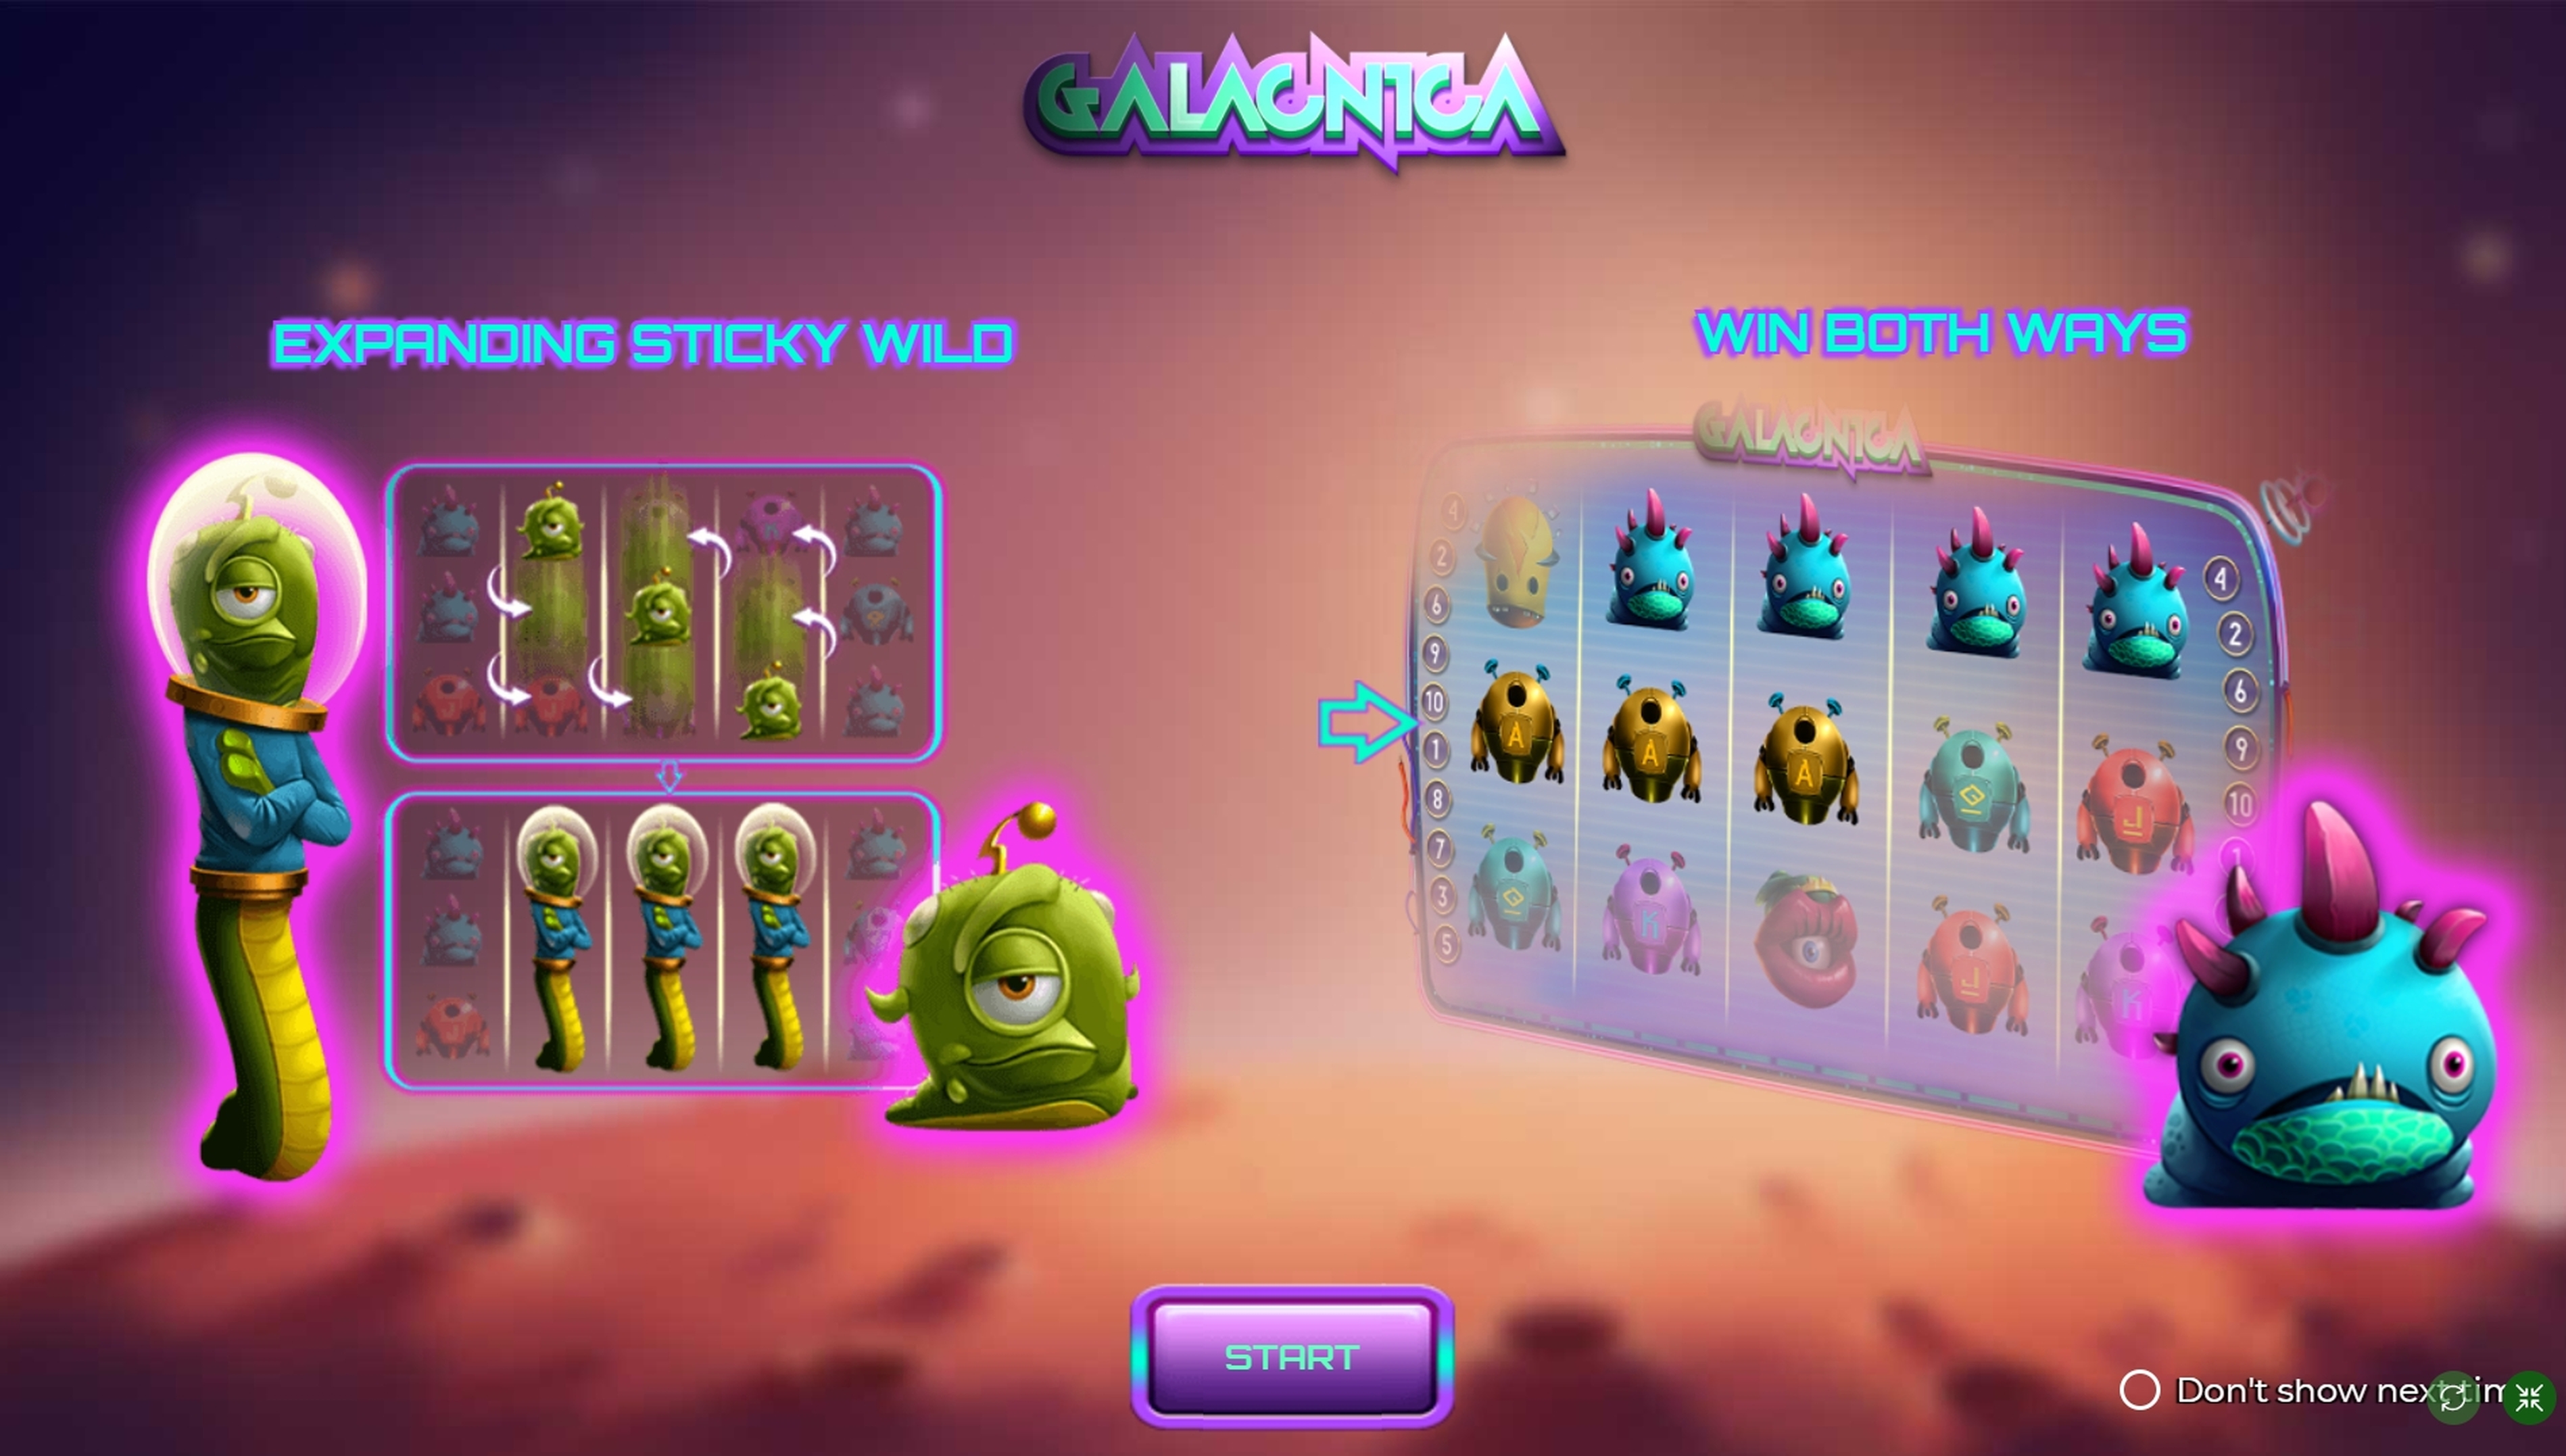 Play Galacnica Free Casino Slot Game by Spinmatic